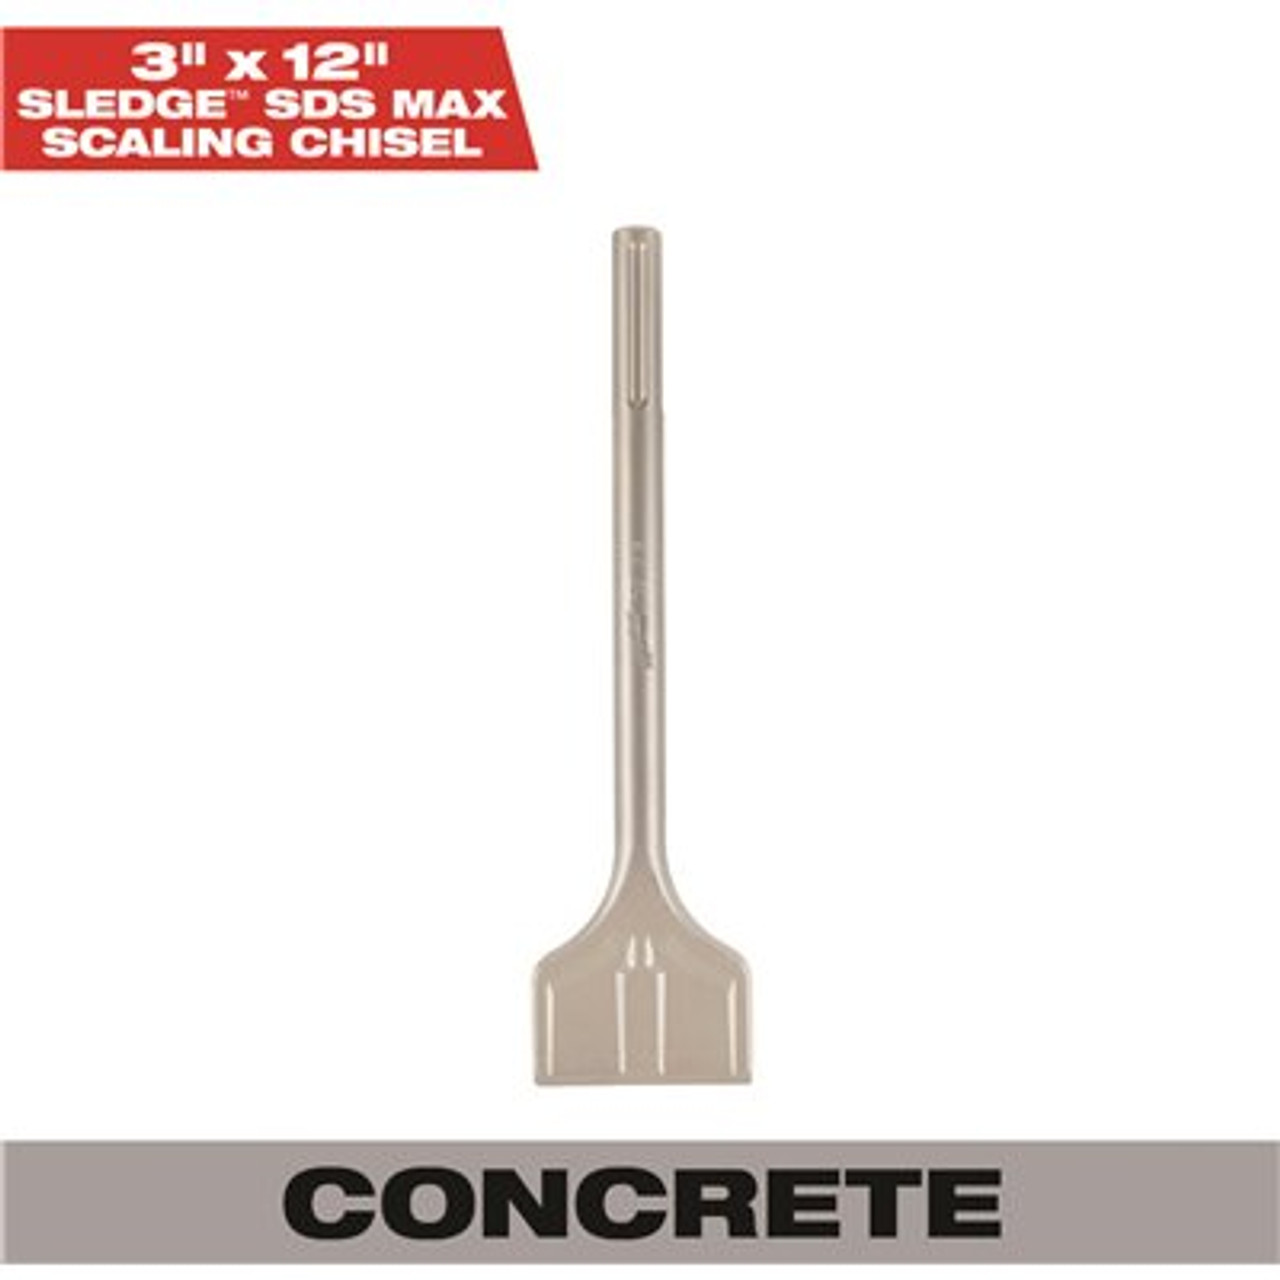 Milwaukee 3 in. x 12 in. SDS-MAX SLEDGE Steel Scaling Chisel